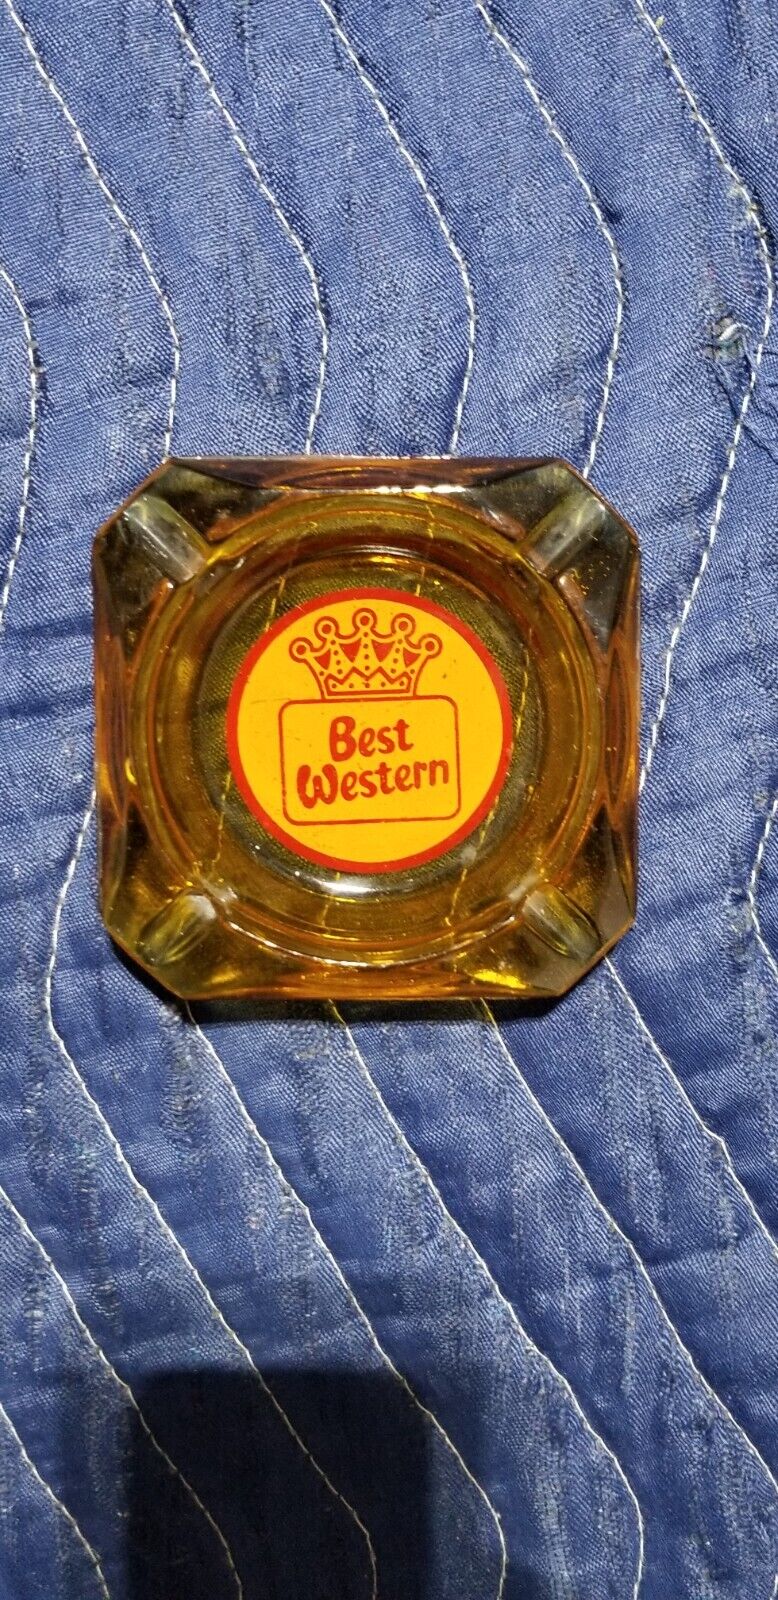 VINTAGE BEST WESTERN MOTEL GLASS ASHTRAY YELLOW RED CROWN